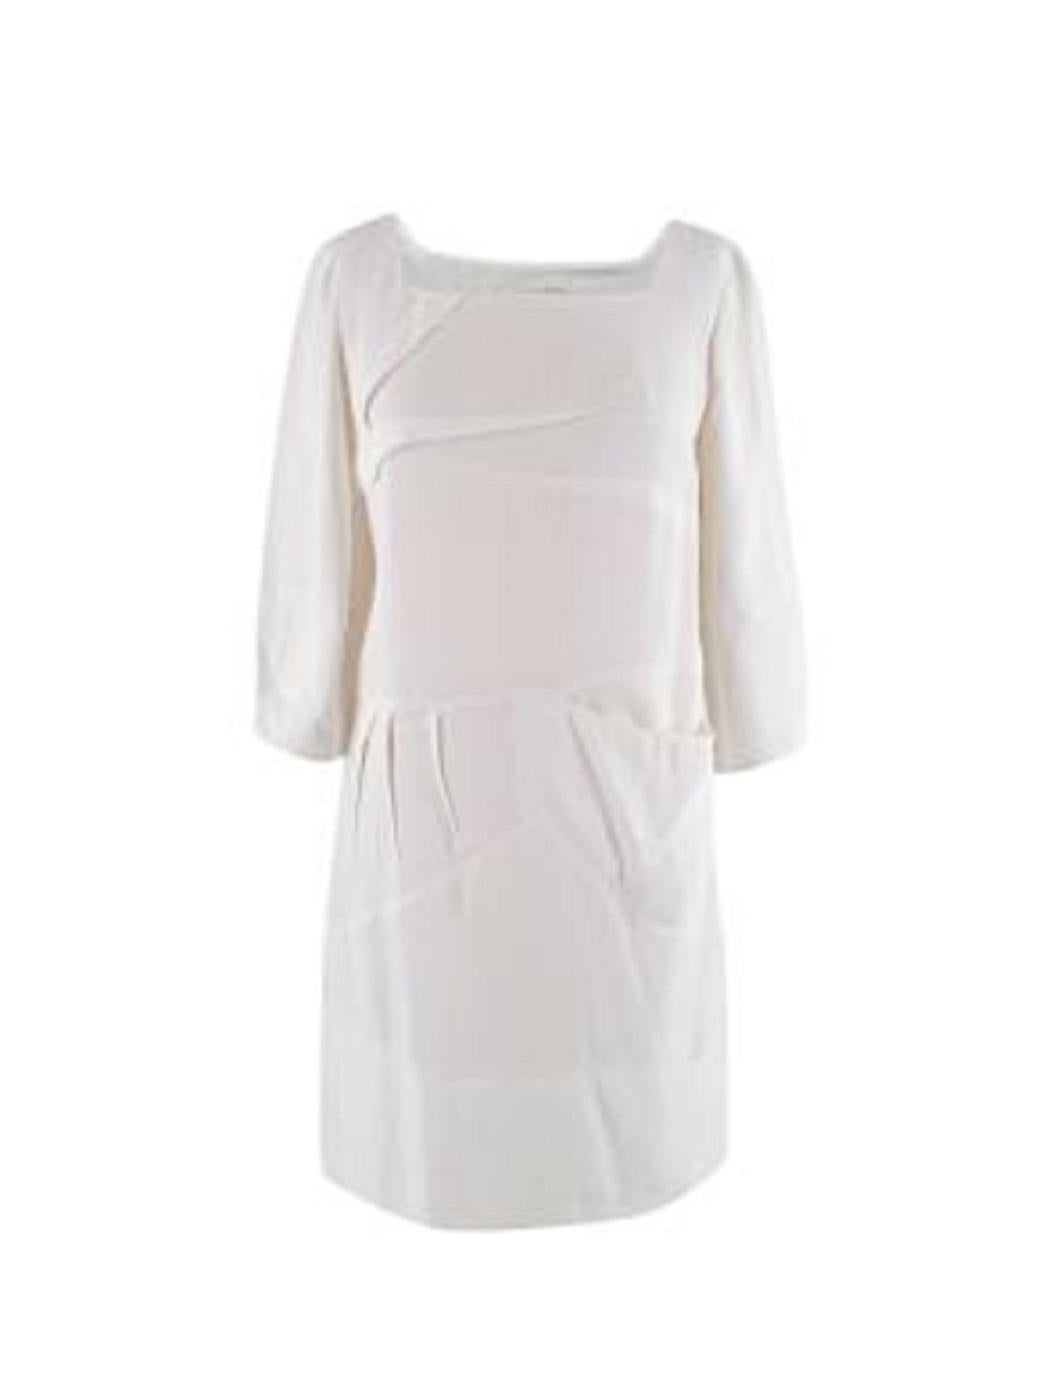 Chloe White Square Neck Silk Mini Dress

-Square neckline 
-Pocket at the waist 
-Cropped sleeve 
-Lined 
-Slip on, mini style 

Material: 

100% Silk 

PLEASE NOTE, THESE ITEMS ARE PRE-OWNED AND MAY SHOW SIGNS OF BEING STORED EVEN WHEN UNWORN AND